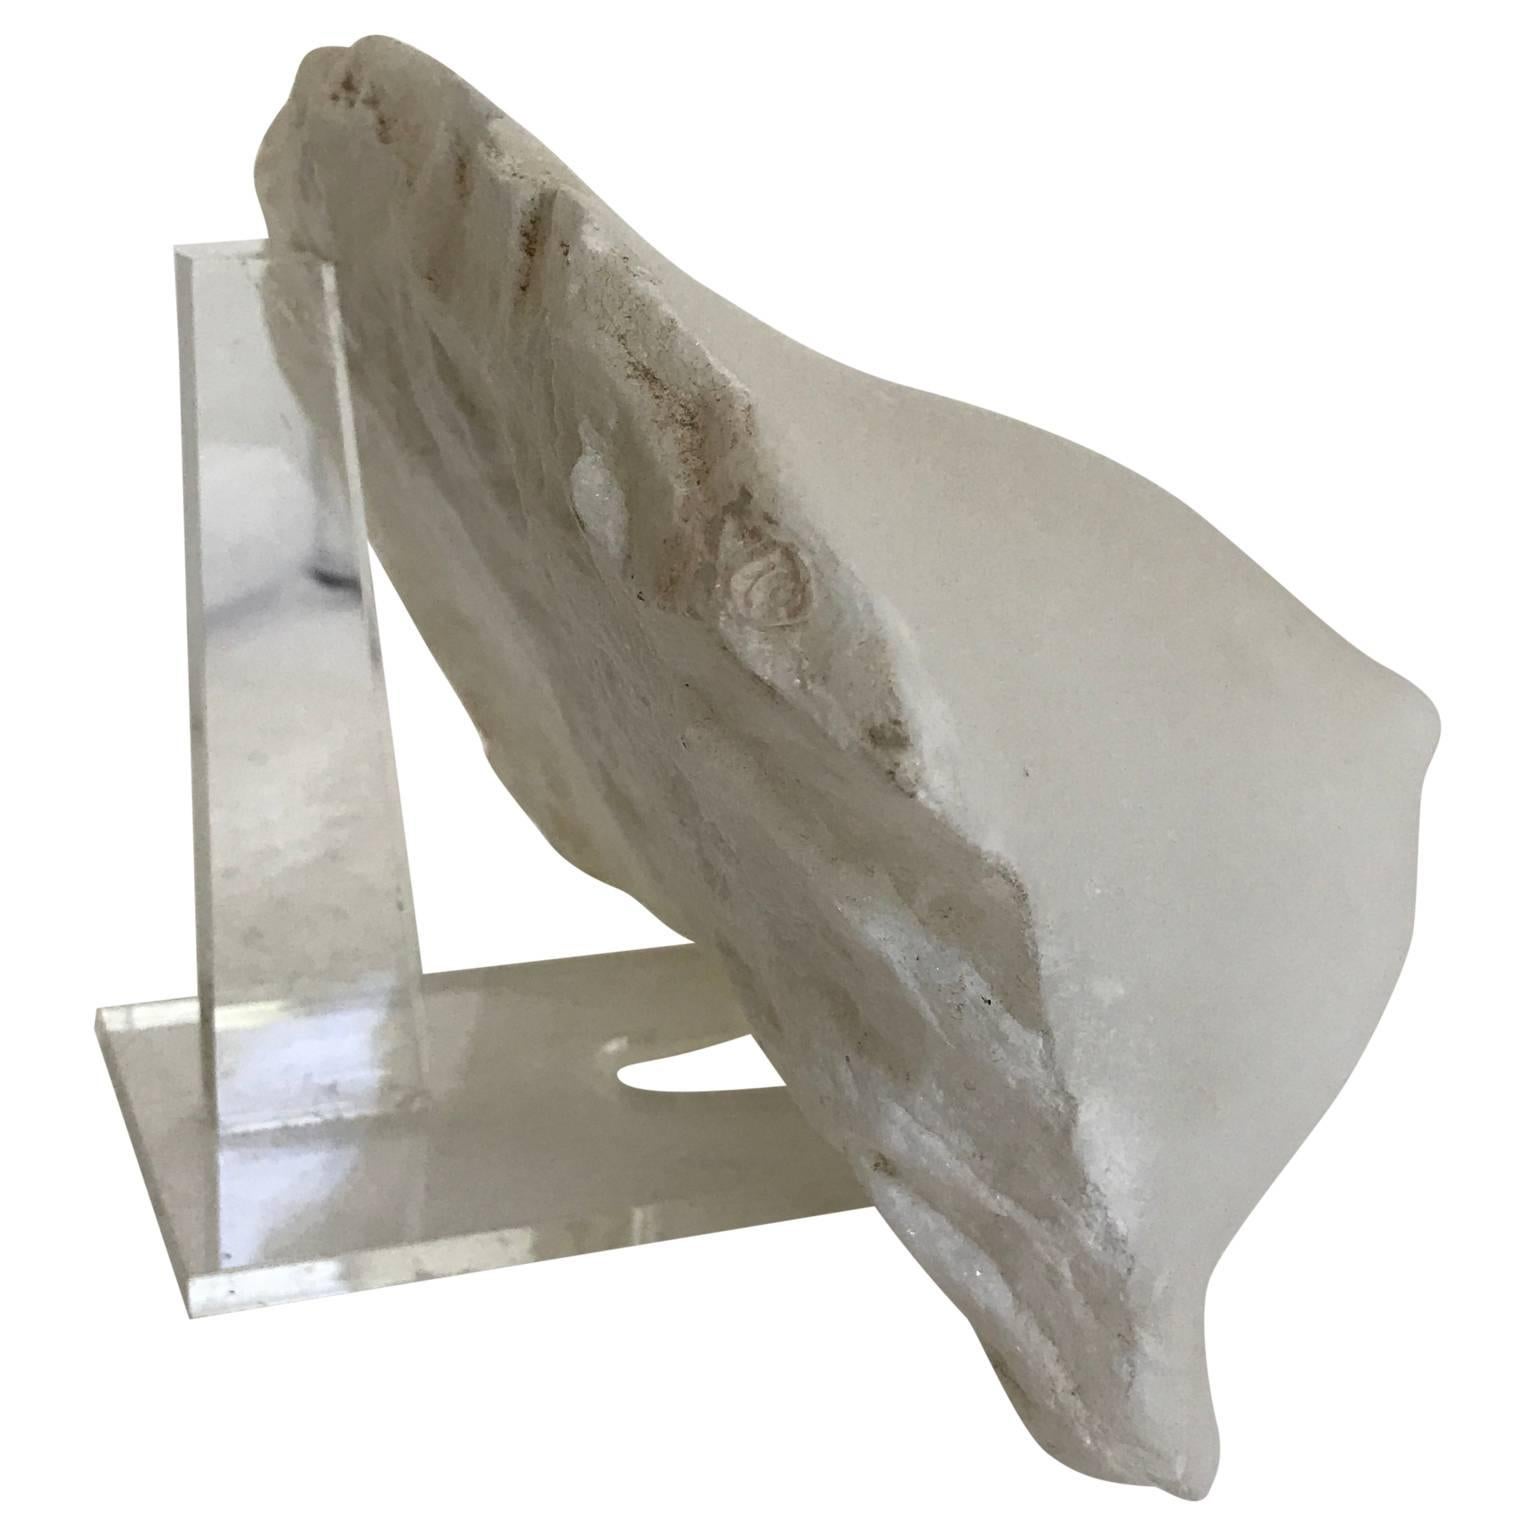 Neoclassical Revival 19th Century Marble Fragment Sculpture of Bosoms